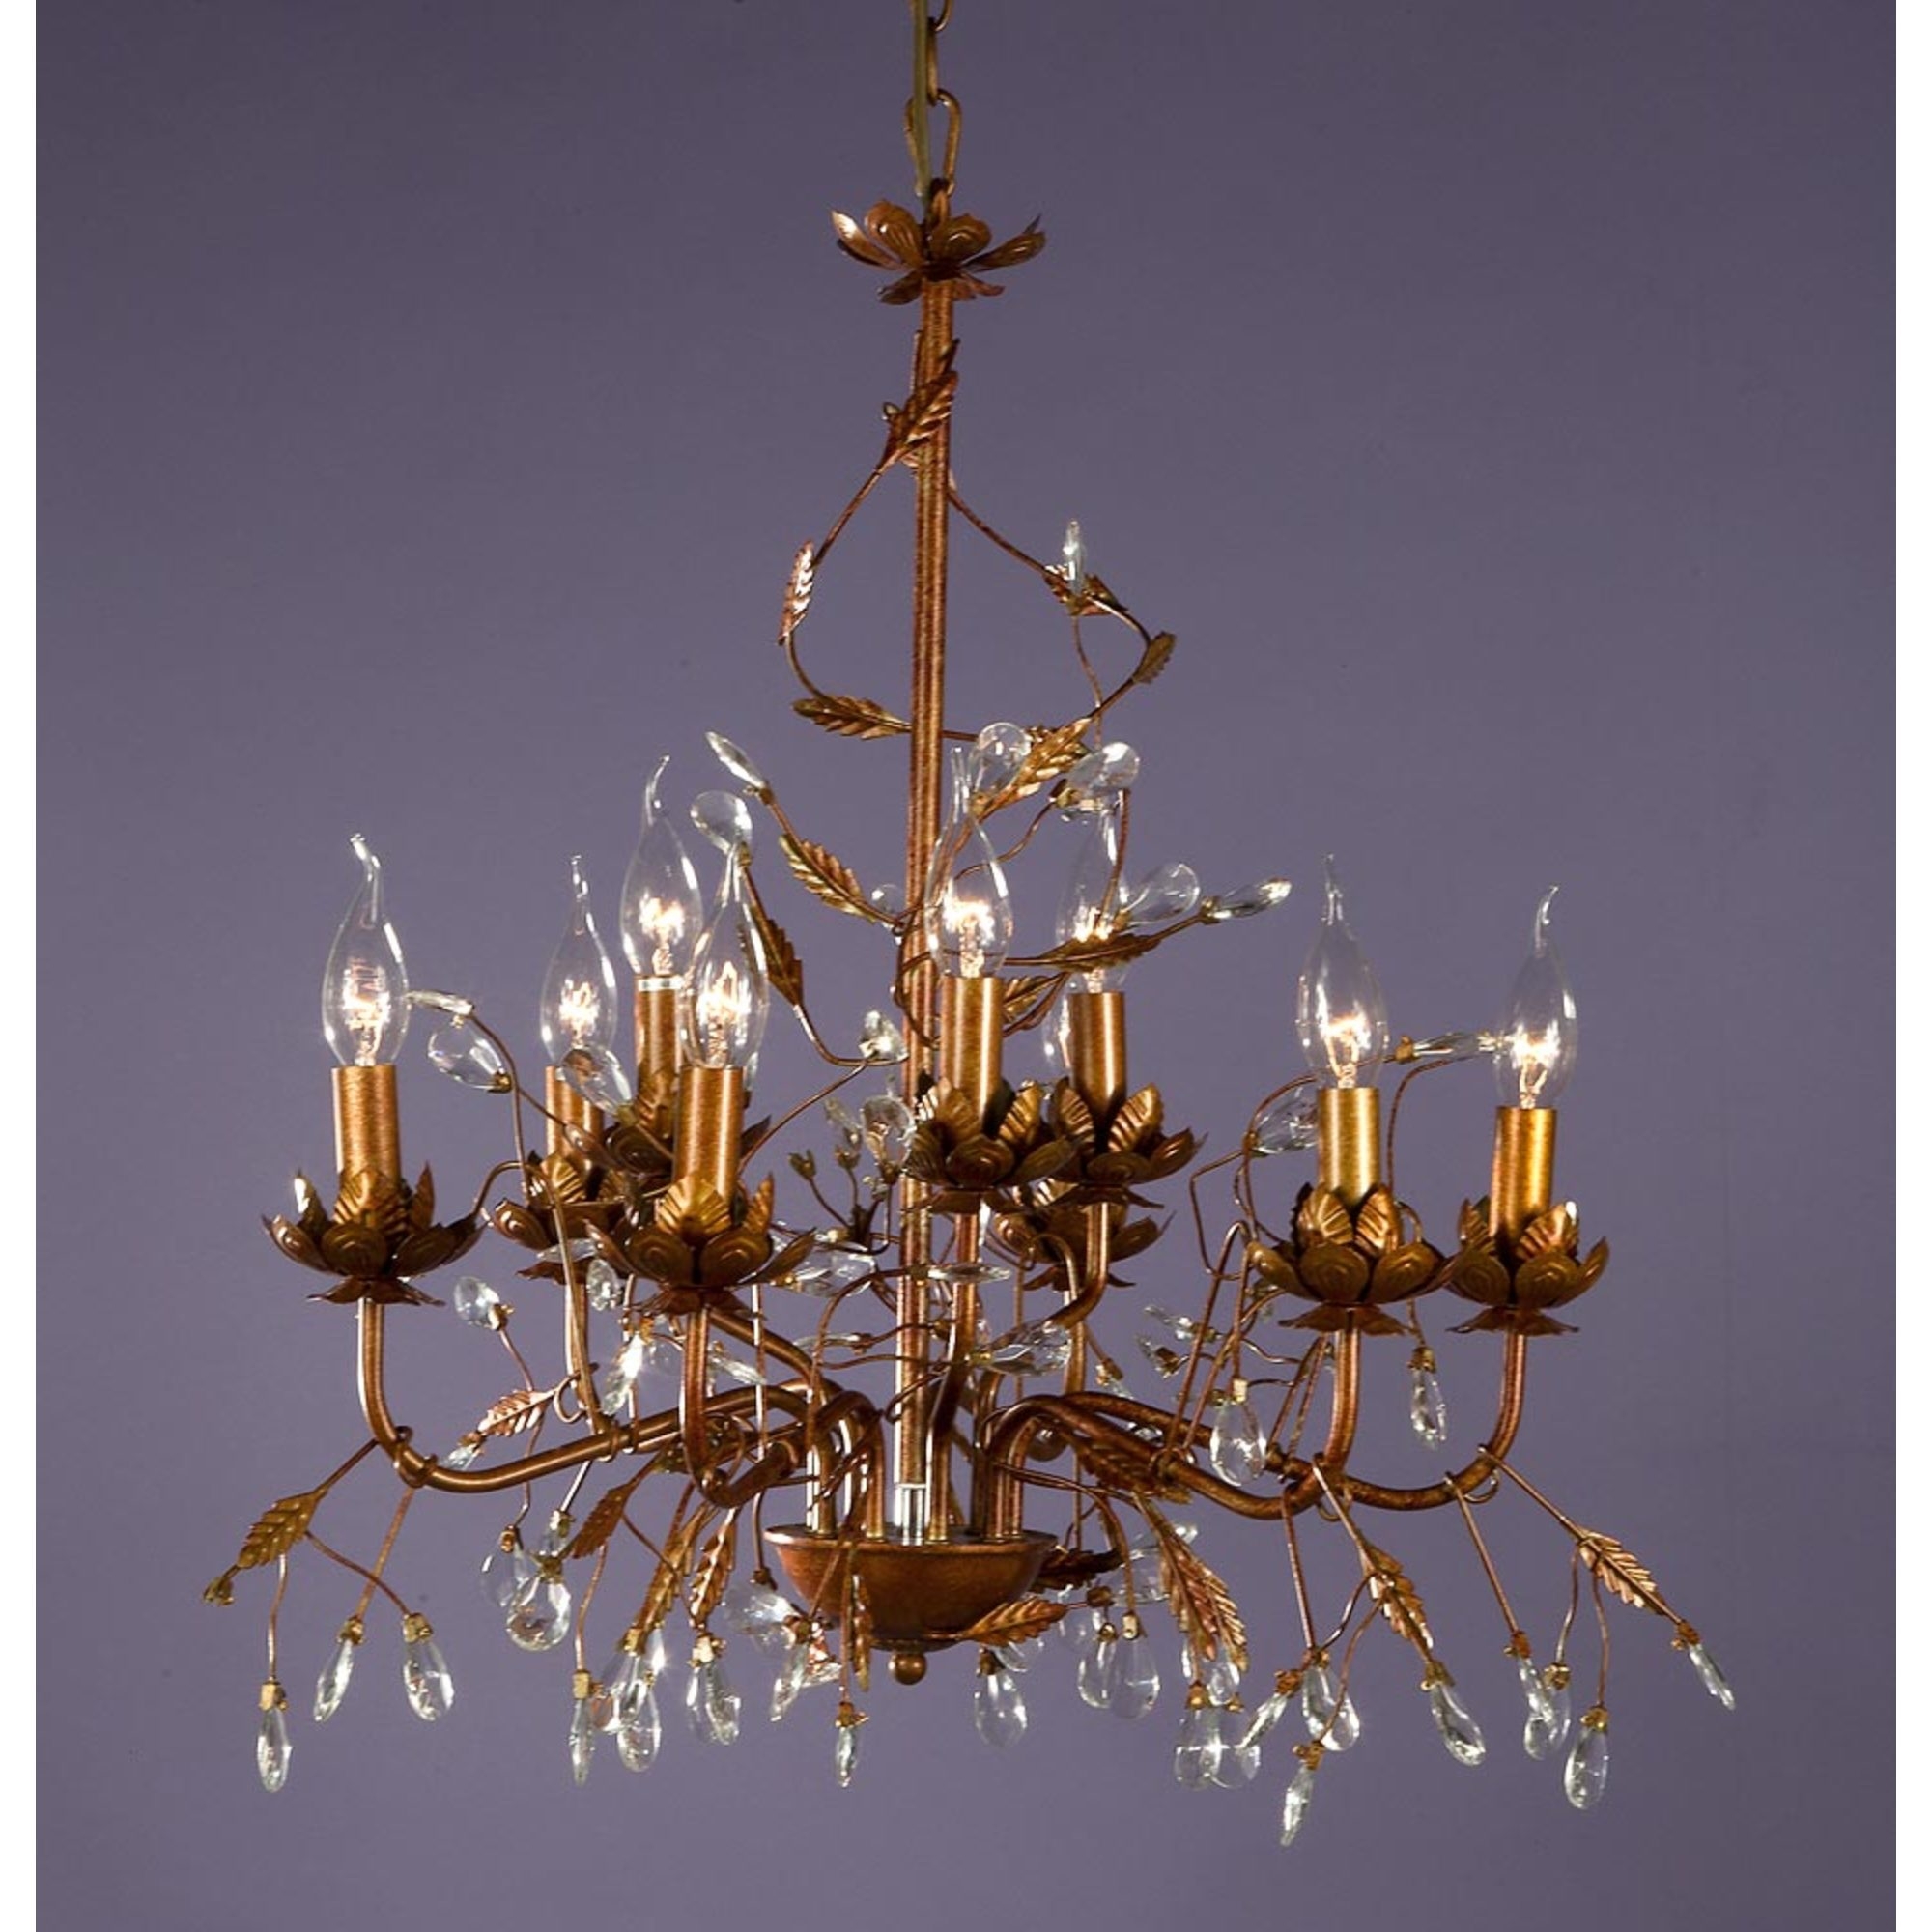 Floral 9 Light Chandelier - Antique Gold and Clear